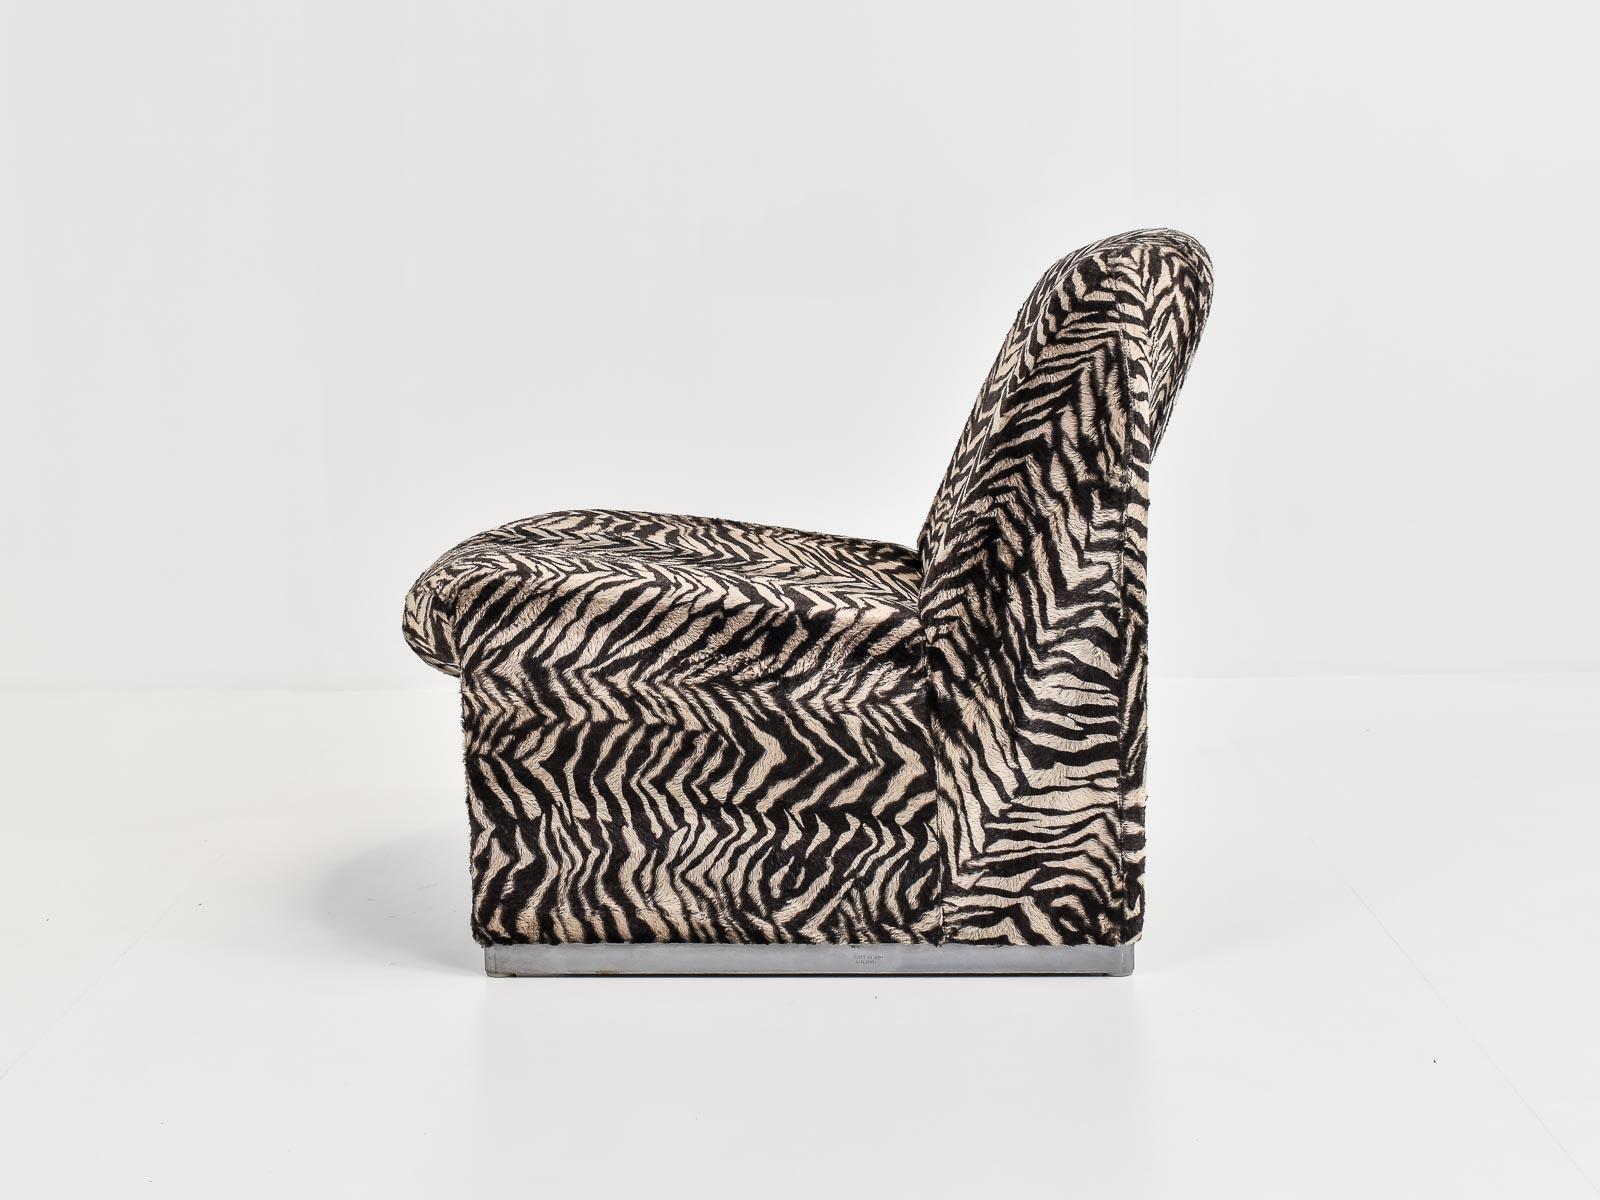 European Pair of Alky Chairs in Zebra Fabric by Giancarlo Piretti, 1970s